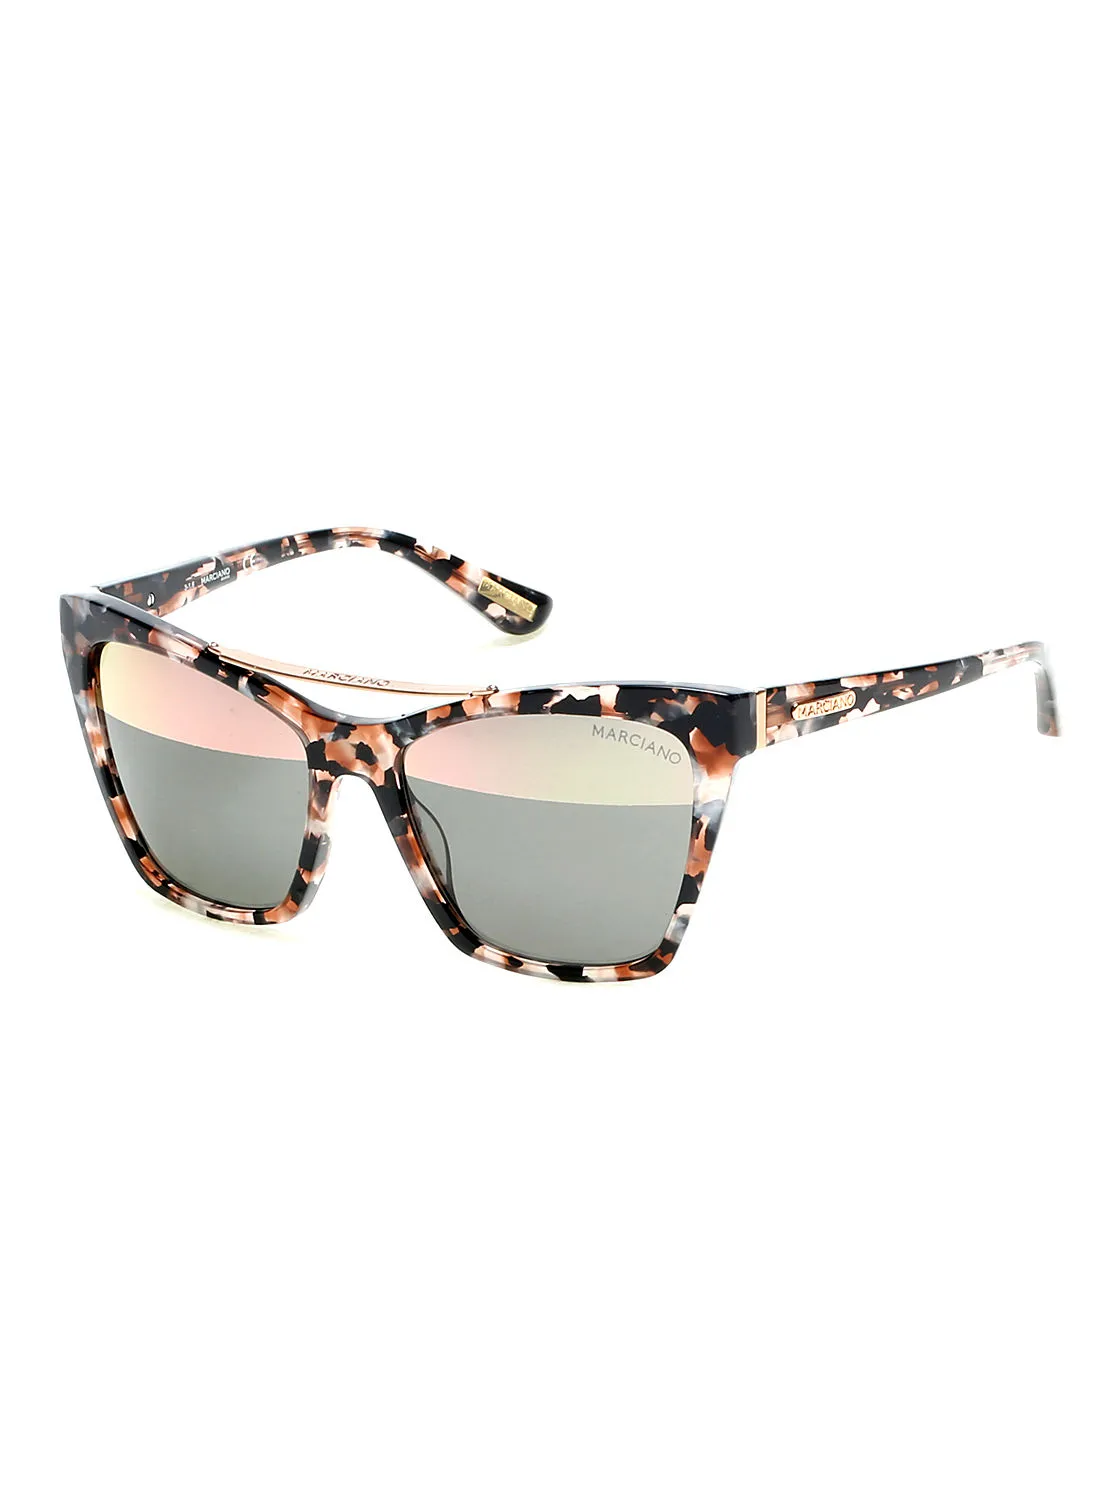 GUESS BY MARCIANO Women's UV Protection Oversized Sunglasses - Lens Size: 57 mm